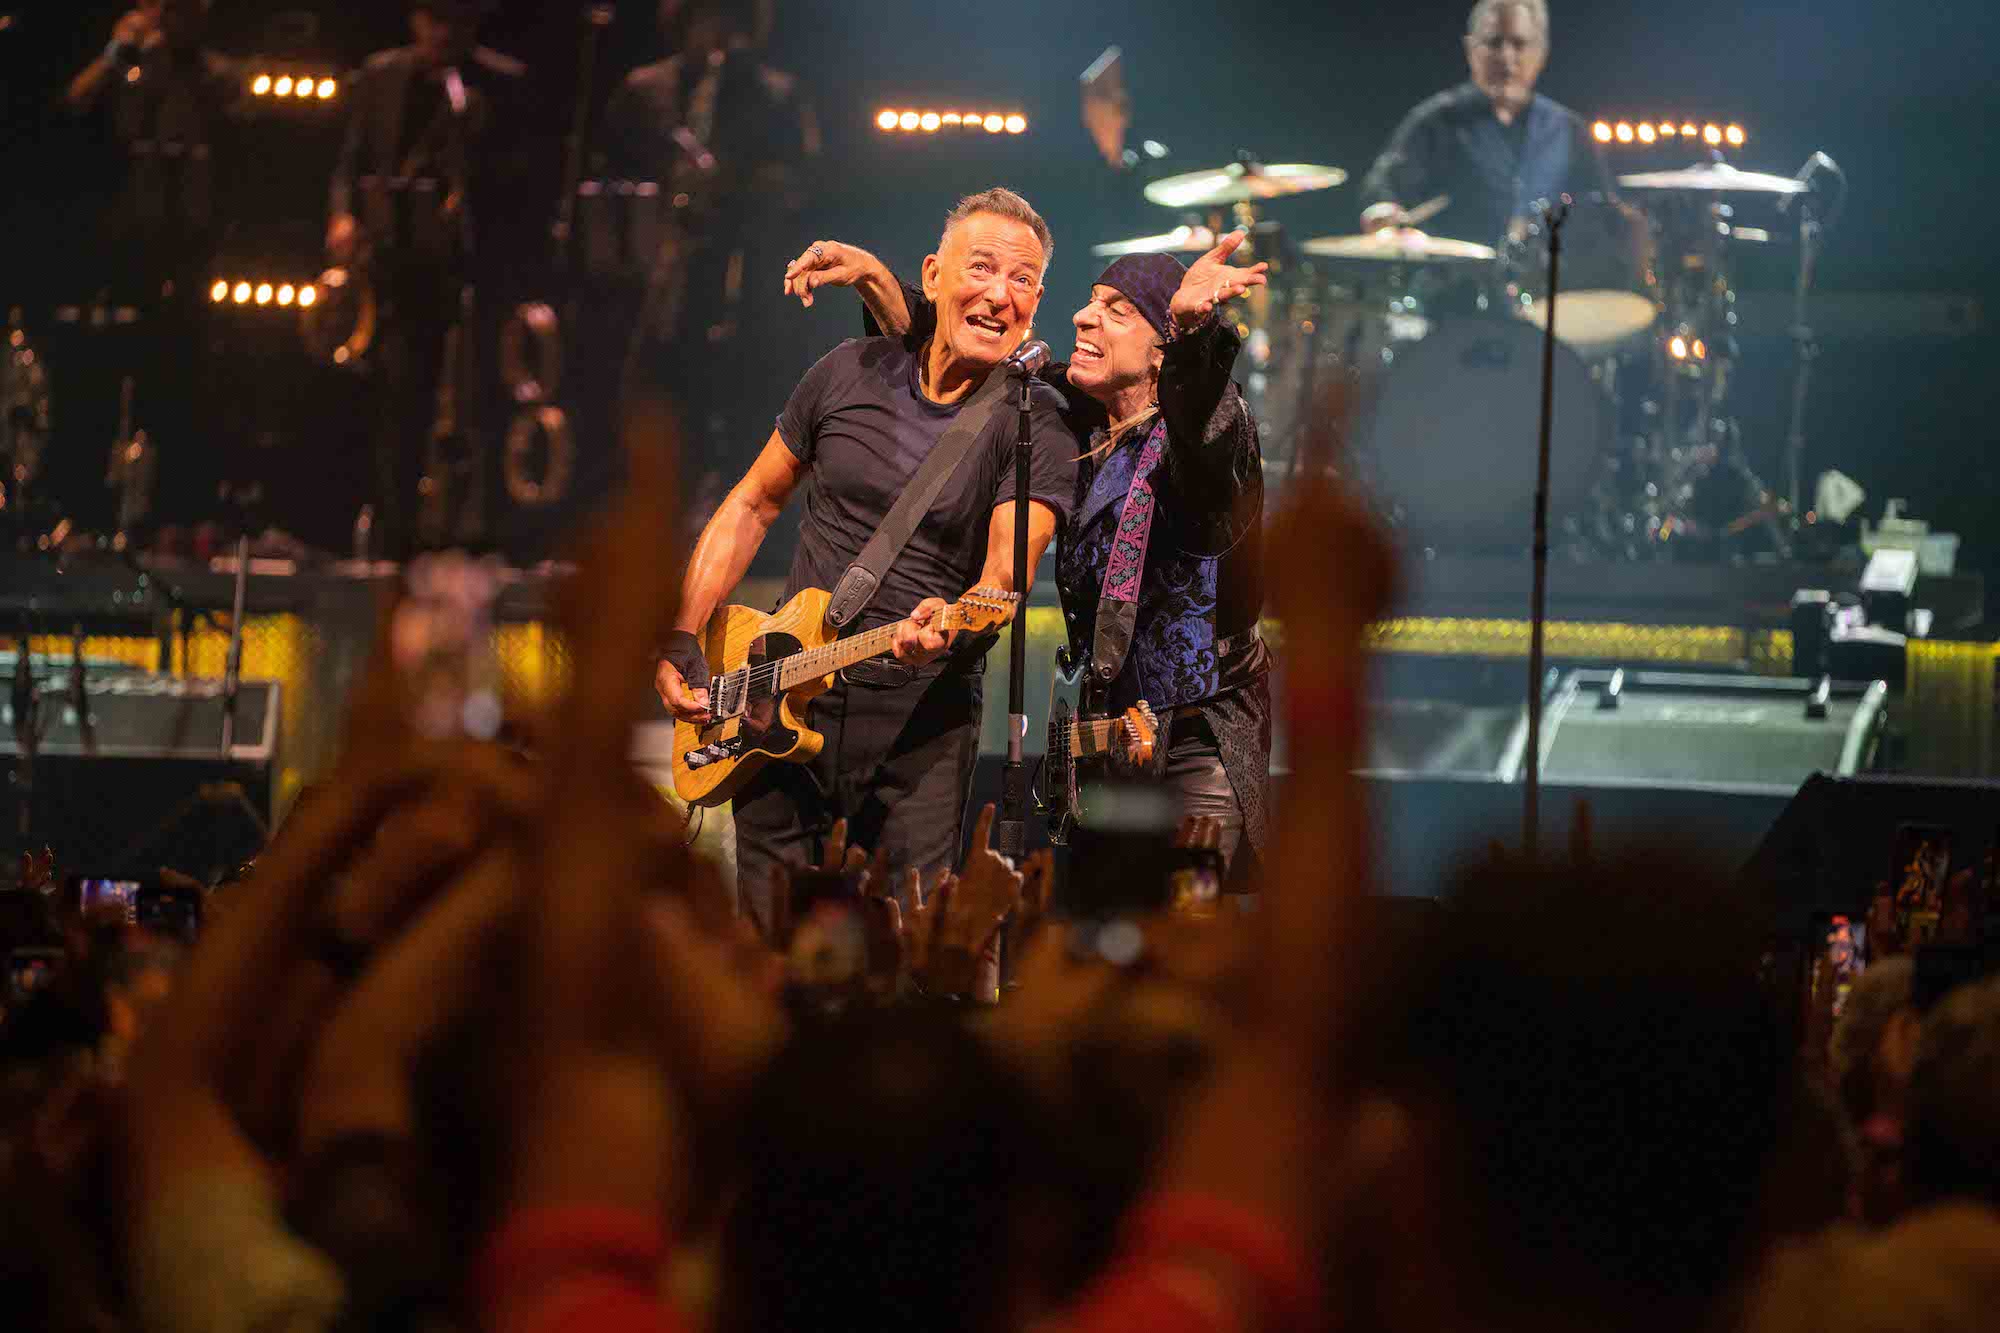 Bruce Springsteen & E Street Band at Hard Rock Live, Hollywood, Florida on February 7, 2023.